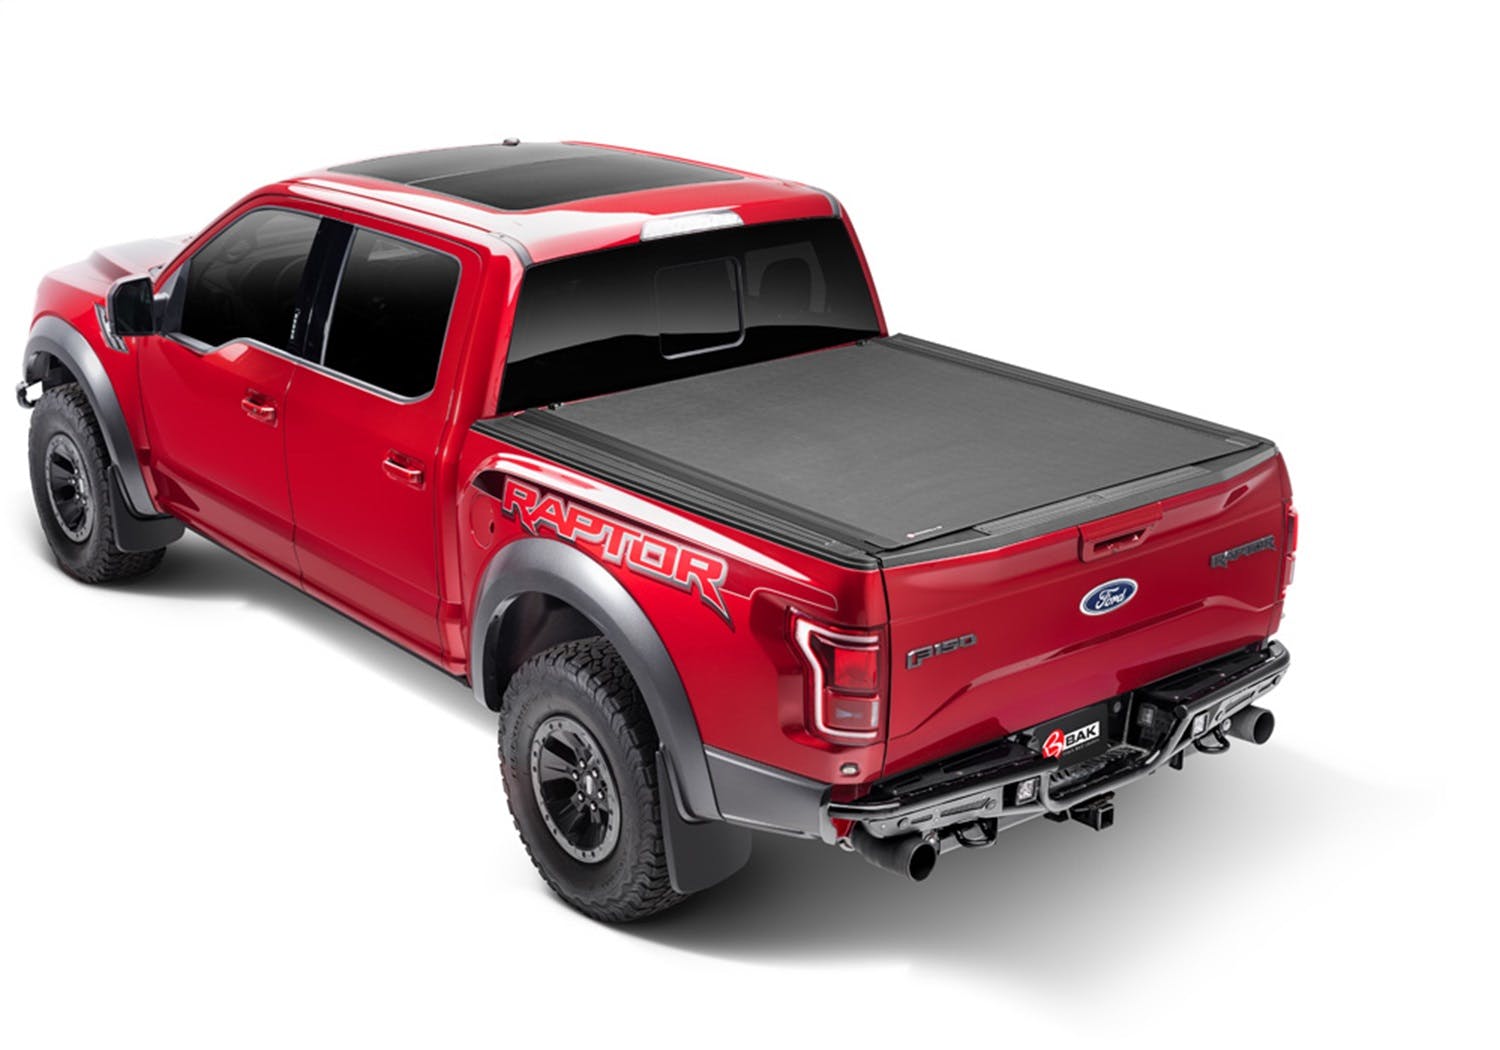 BAK Industries 80410 Revolver X4s Hard Rolling Truck Bed Cover